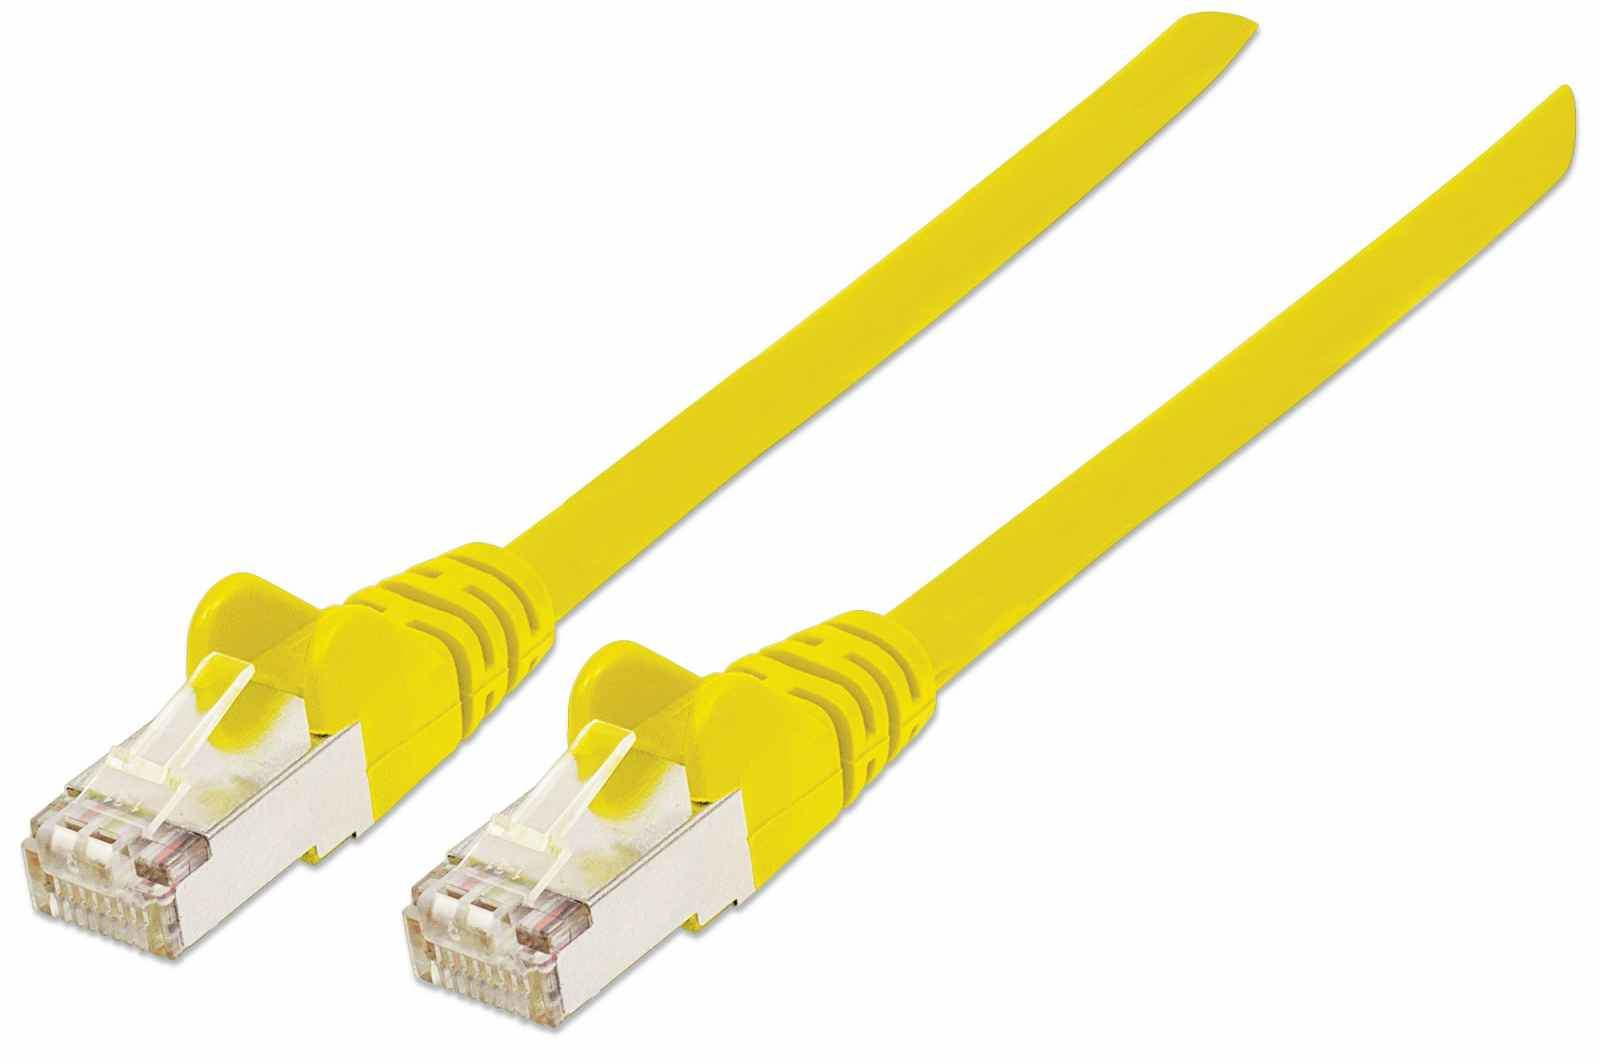 Intellinet Network Patch Cable, Cat7 Cable/Cat6A Plugs, 0.5m, Yellow, Copper, S/FTP, LSOH / LSZH, PVC, RJ45, Gold Plated Contacts, Snagless, Booted, Polybag - Patch-Kabel - RJ-45 (M)